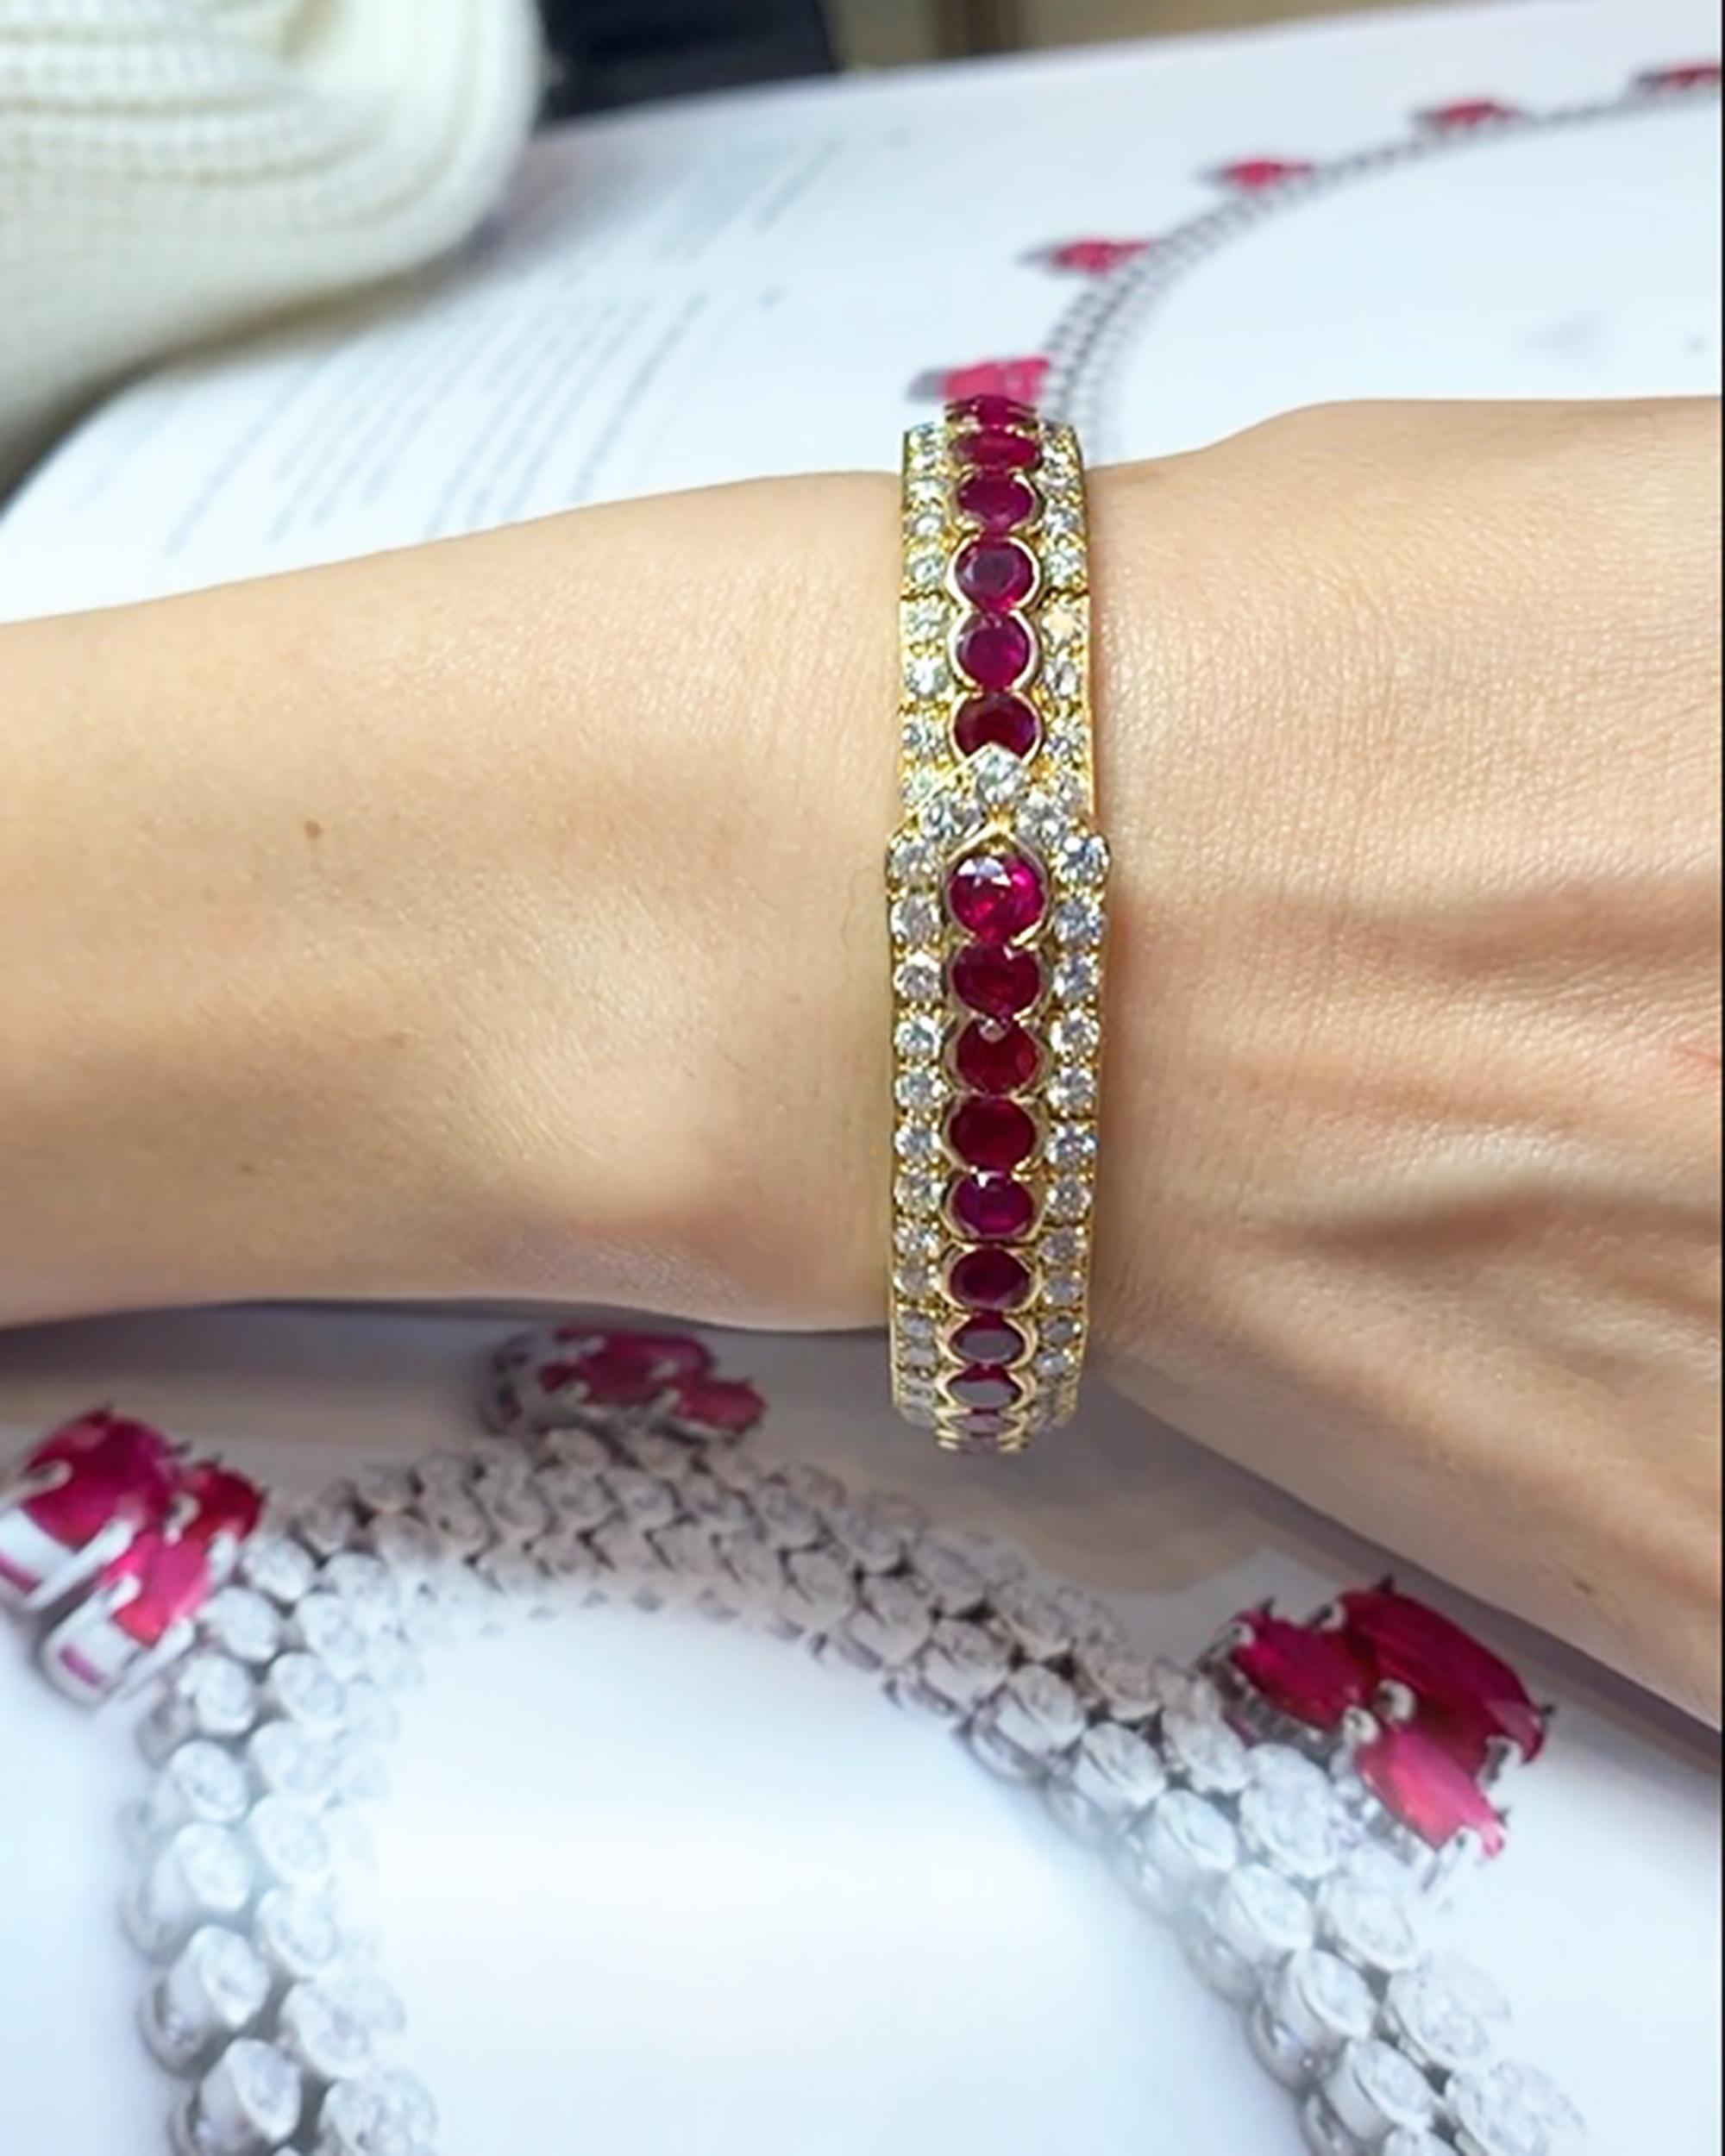 A beautiful bracelet decorated with rubies and diamonds.
41 round rubies and round diamonds.
Total weight of diamonds is approximately 6.30 carats. 
They are equivalent to G-H colors, VS clarity.
Metal is 18k yellow gold weighing 44 grams.